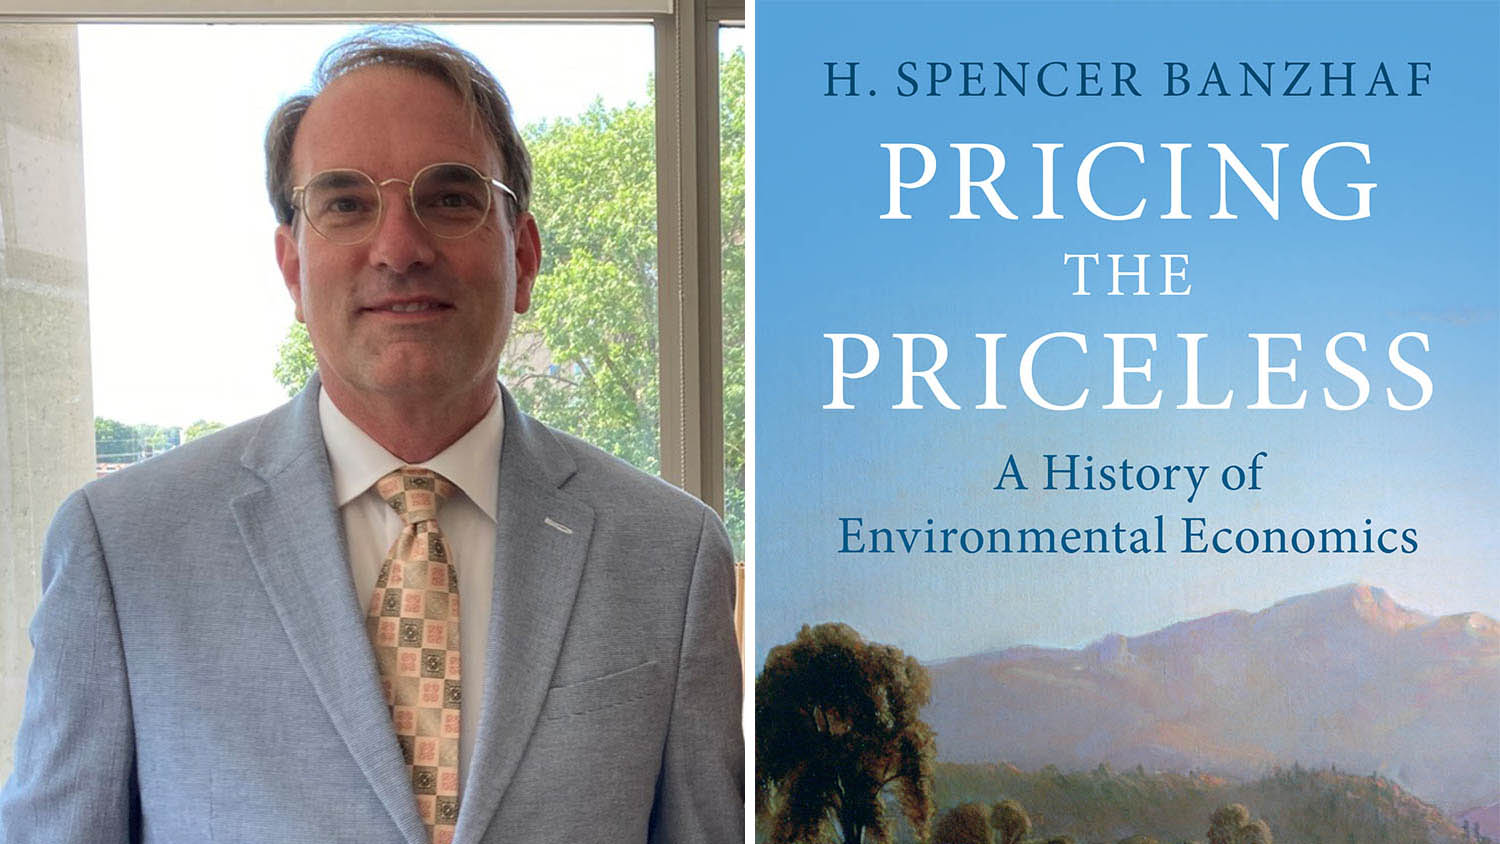 pricing the priceless book cover and author spencer banzhoff